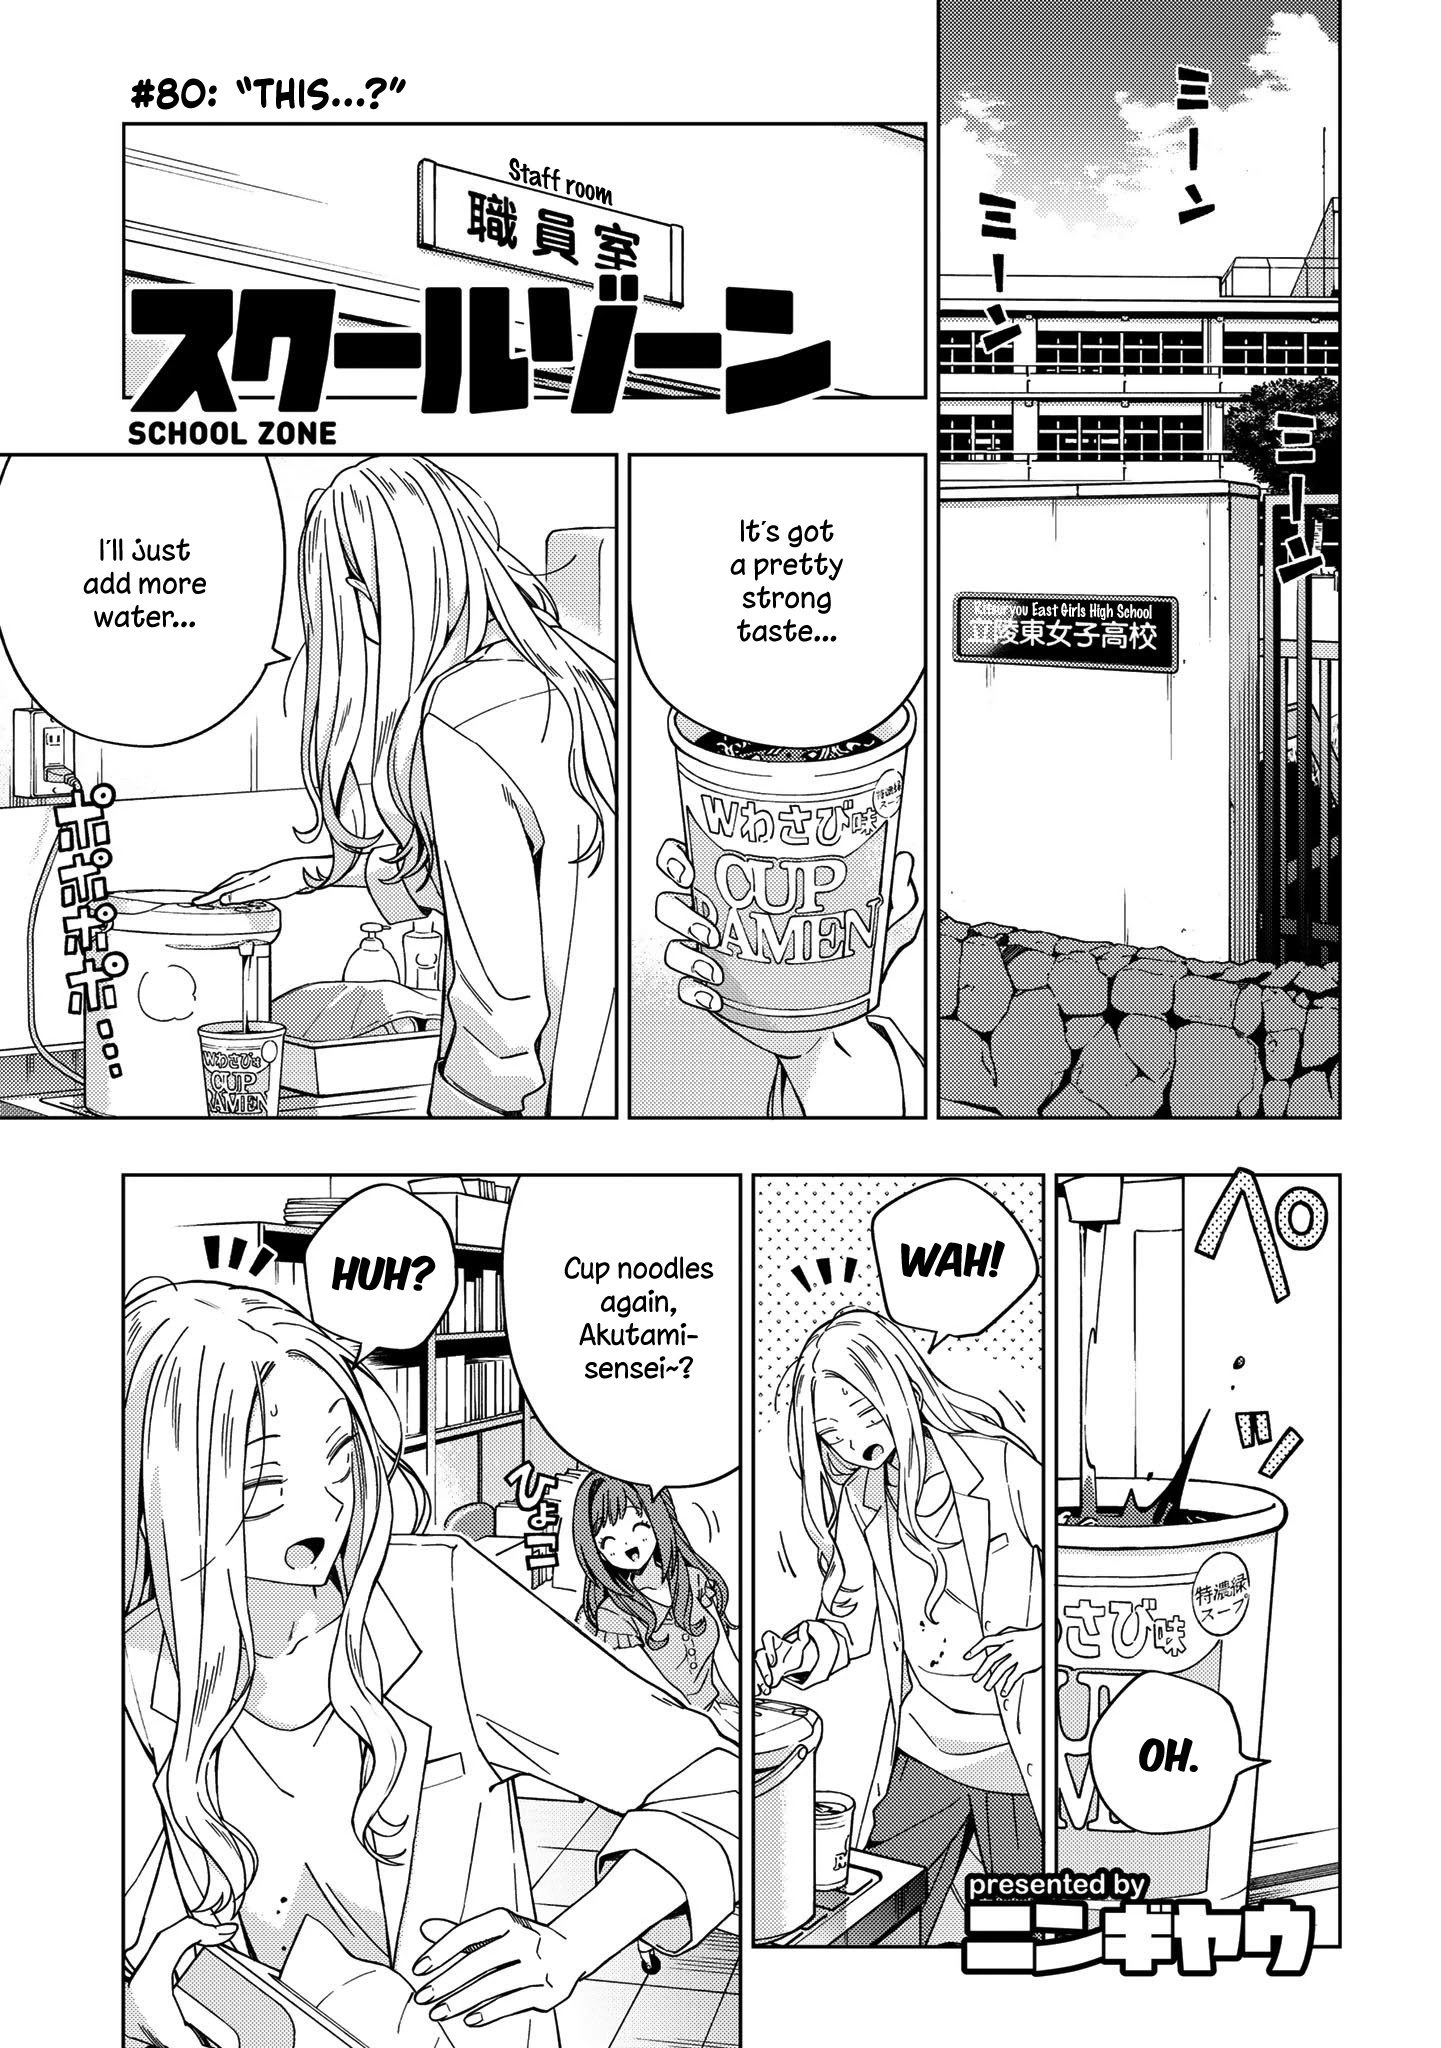 School Zone (Ningiyau) Chapter 80: This...? - Picture 1